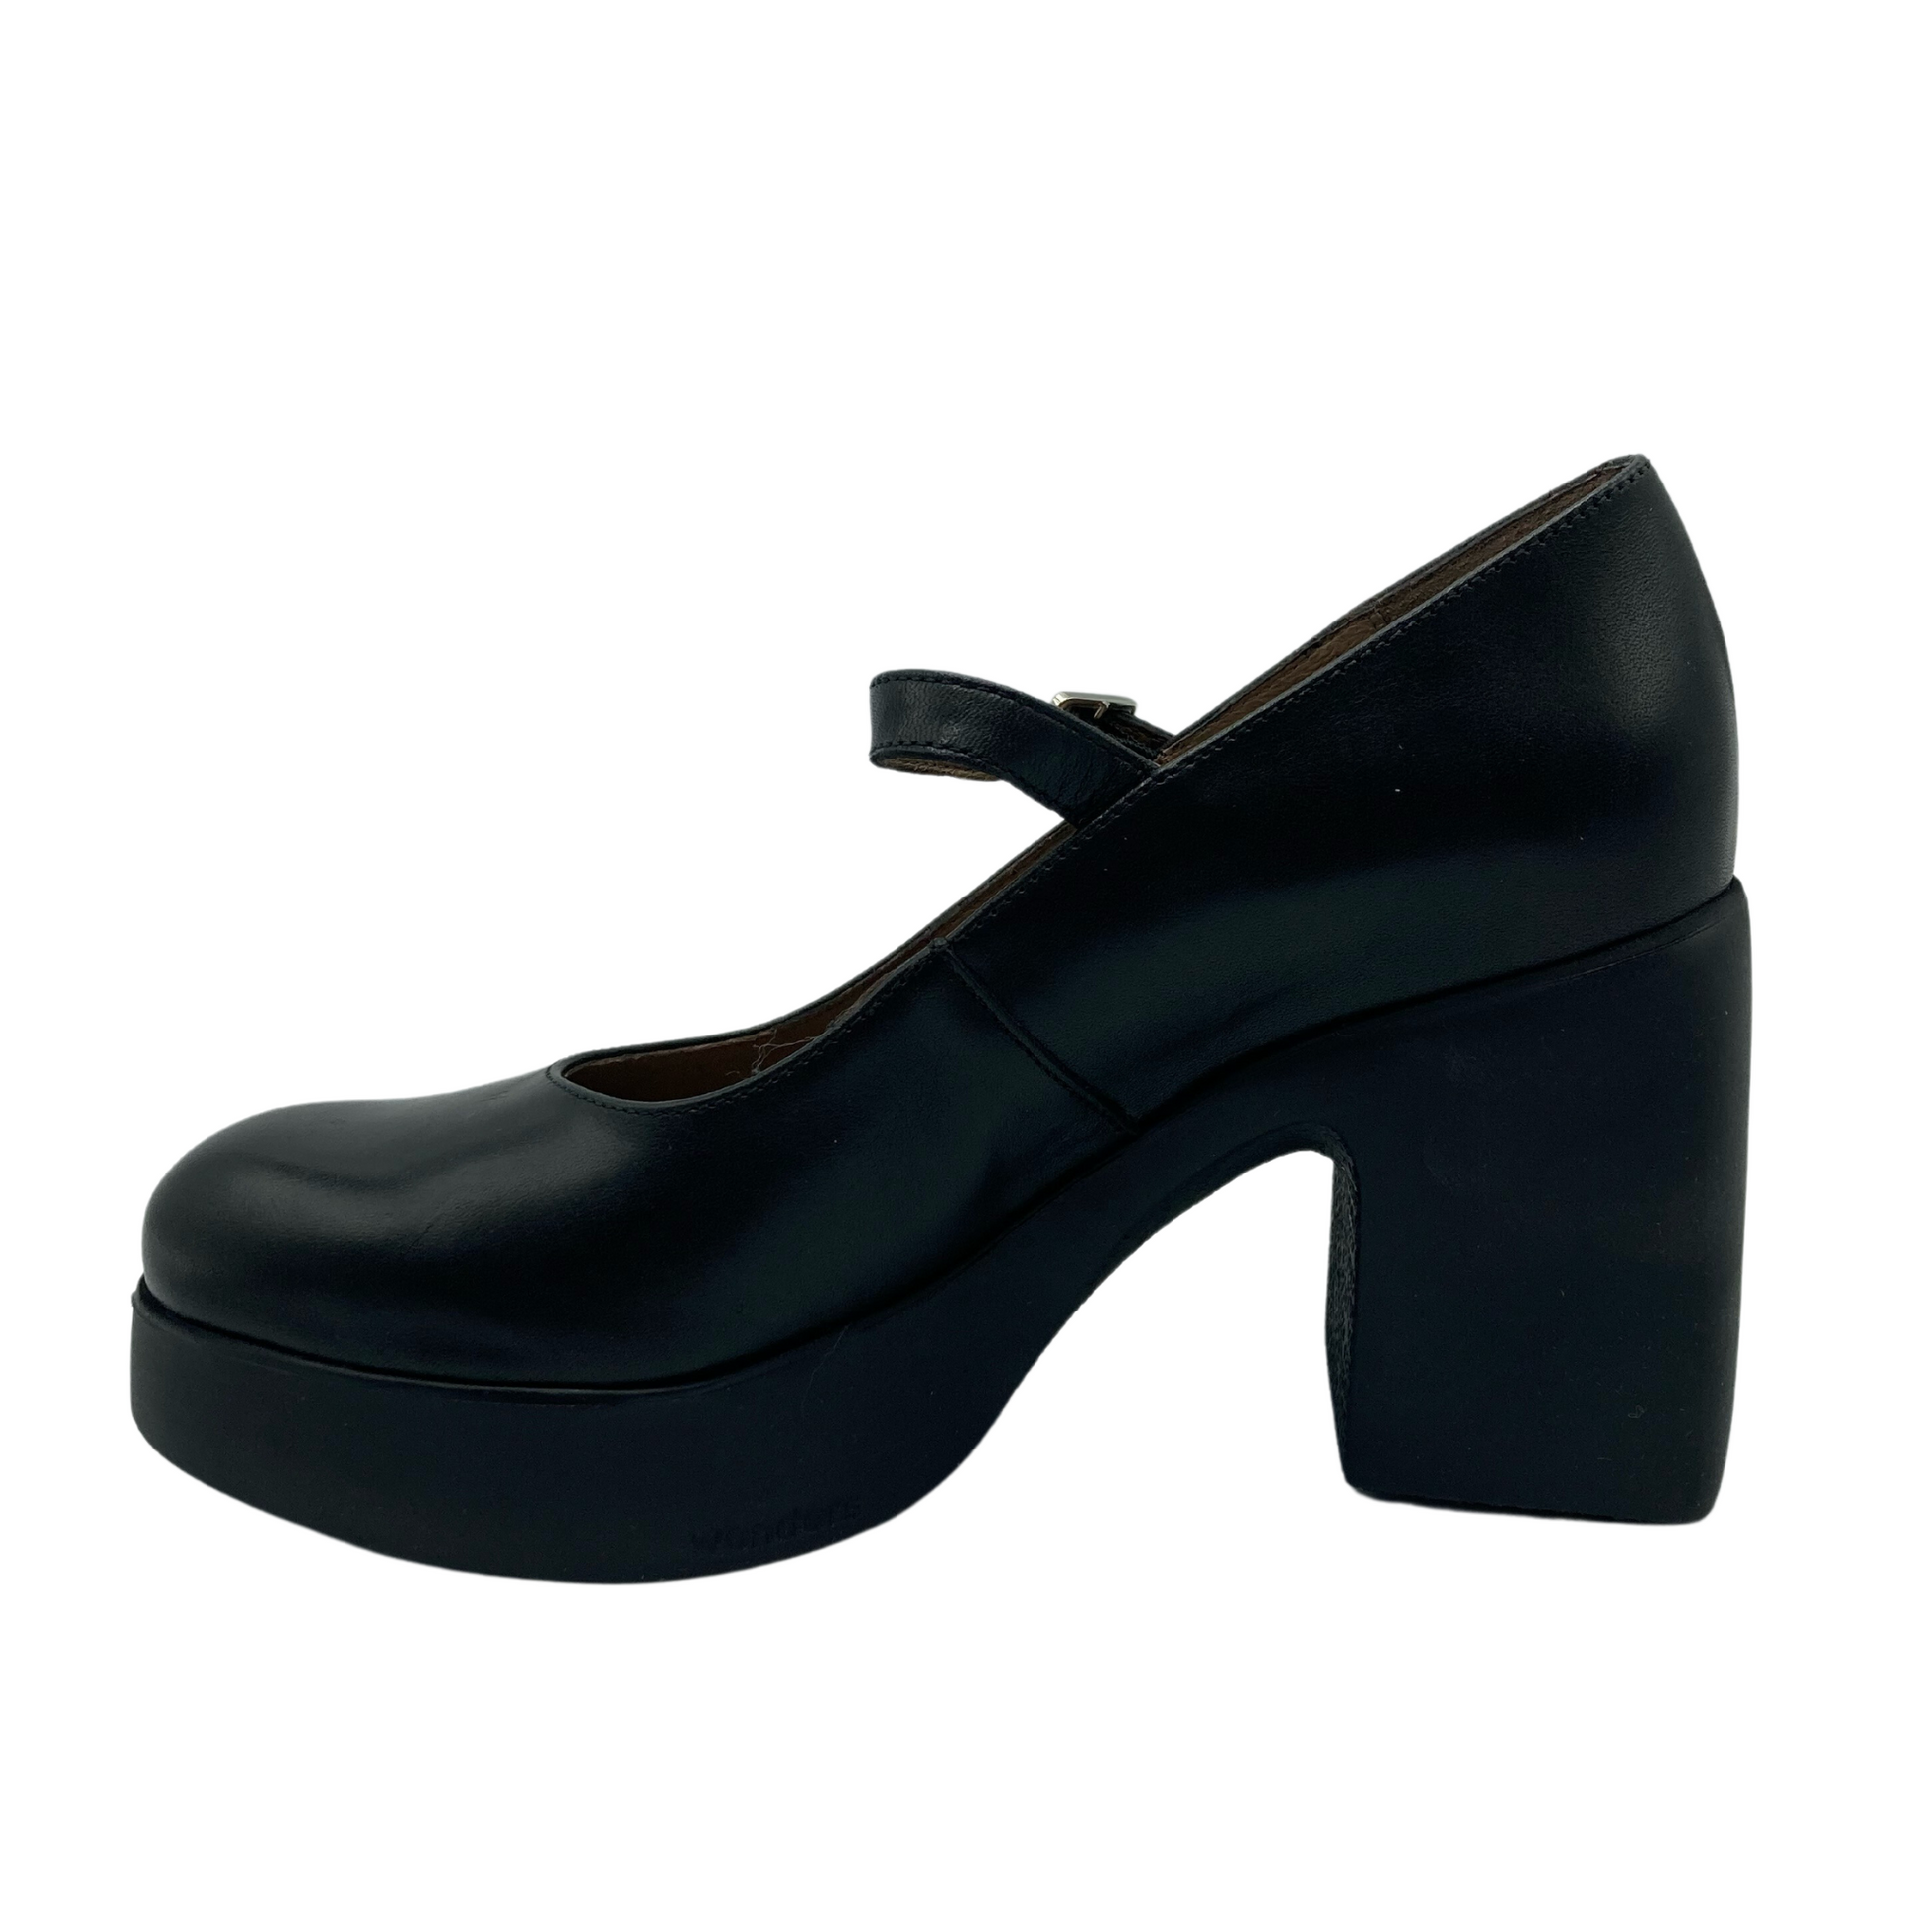 Left facing view of black leather mary jane heel